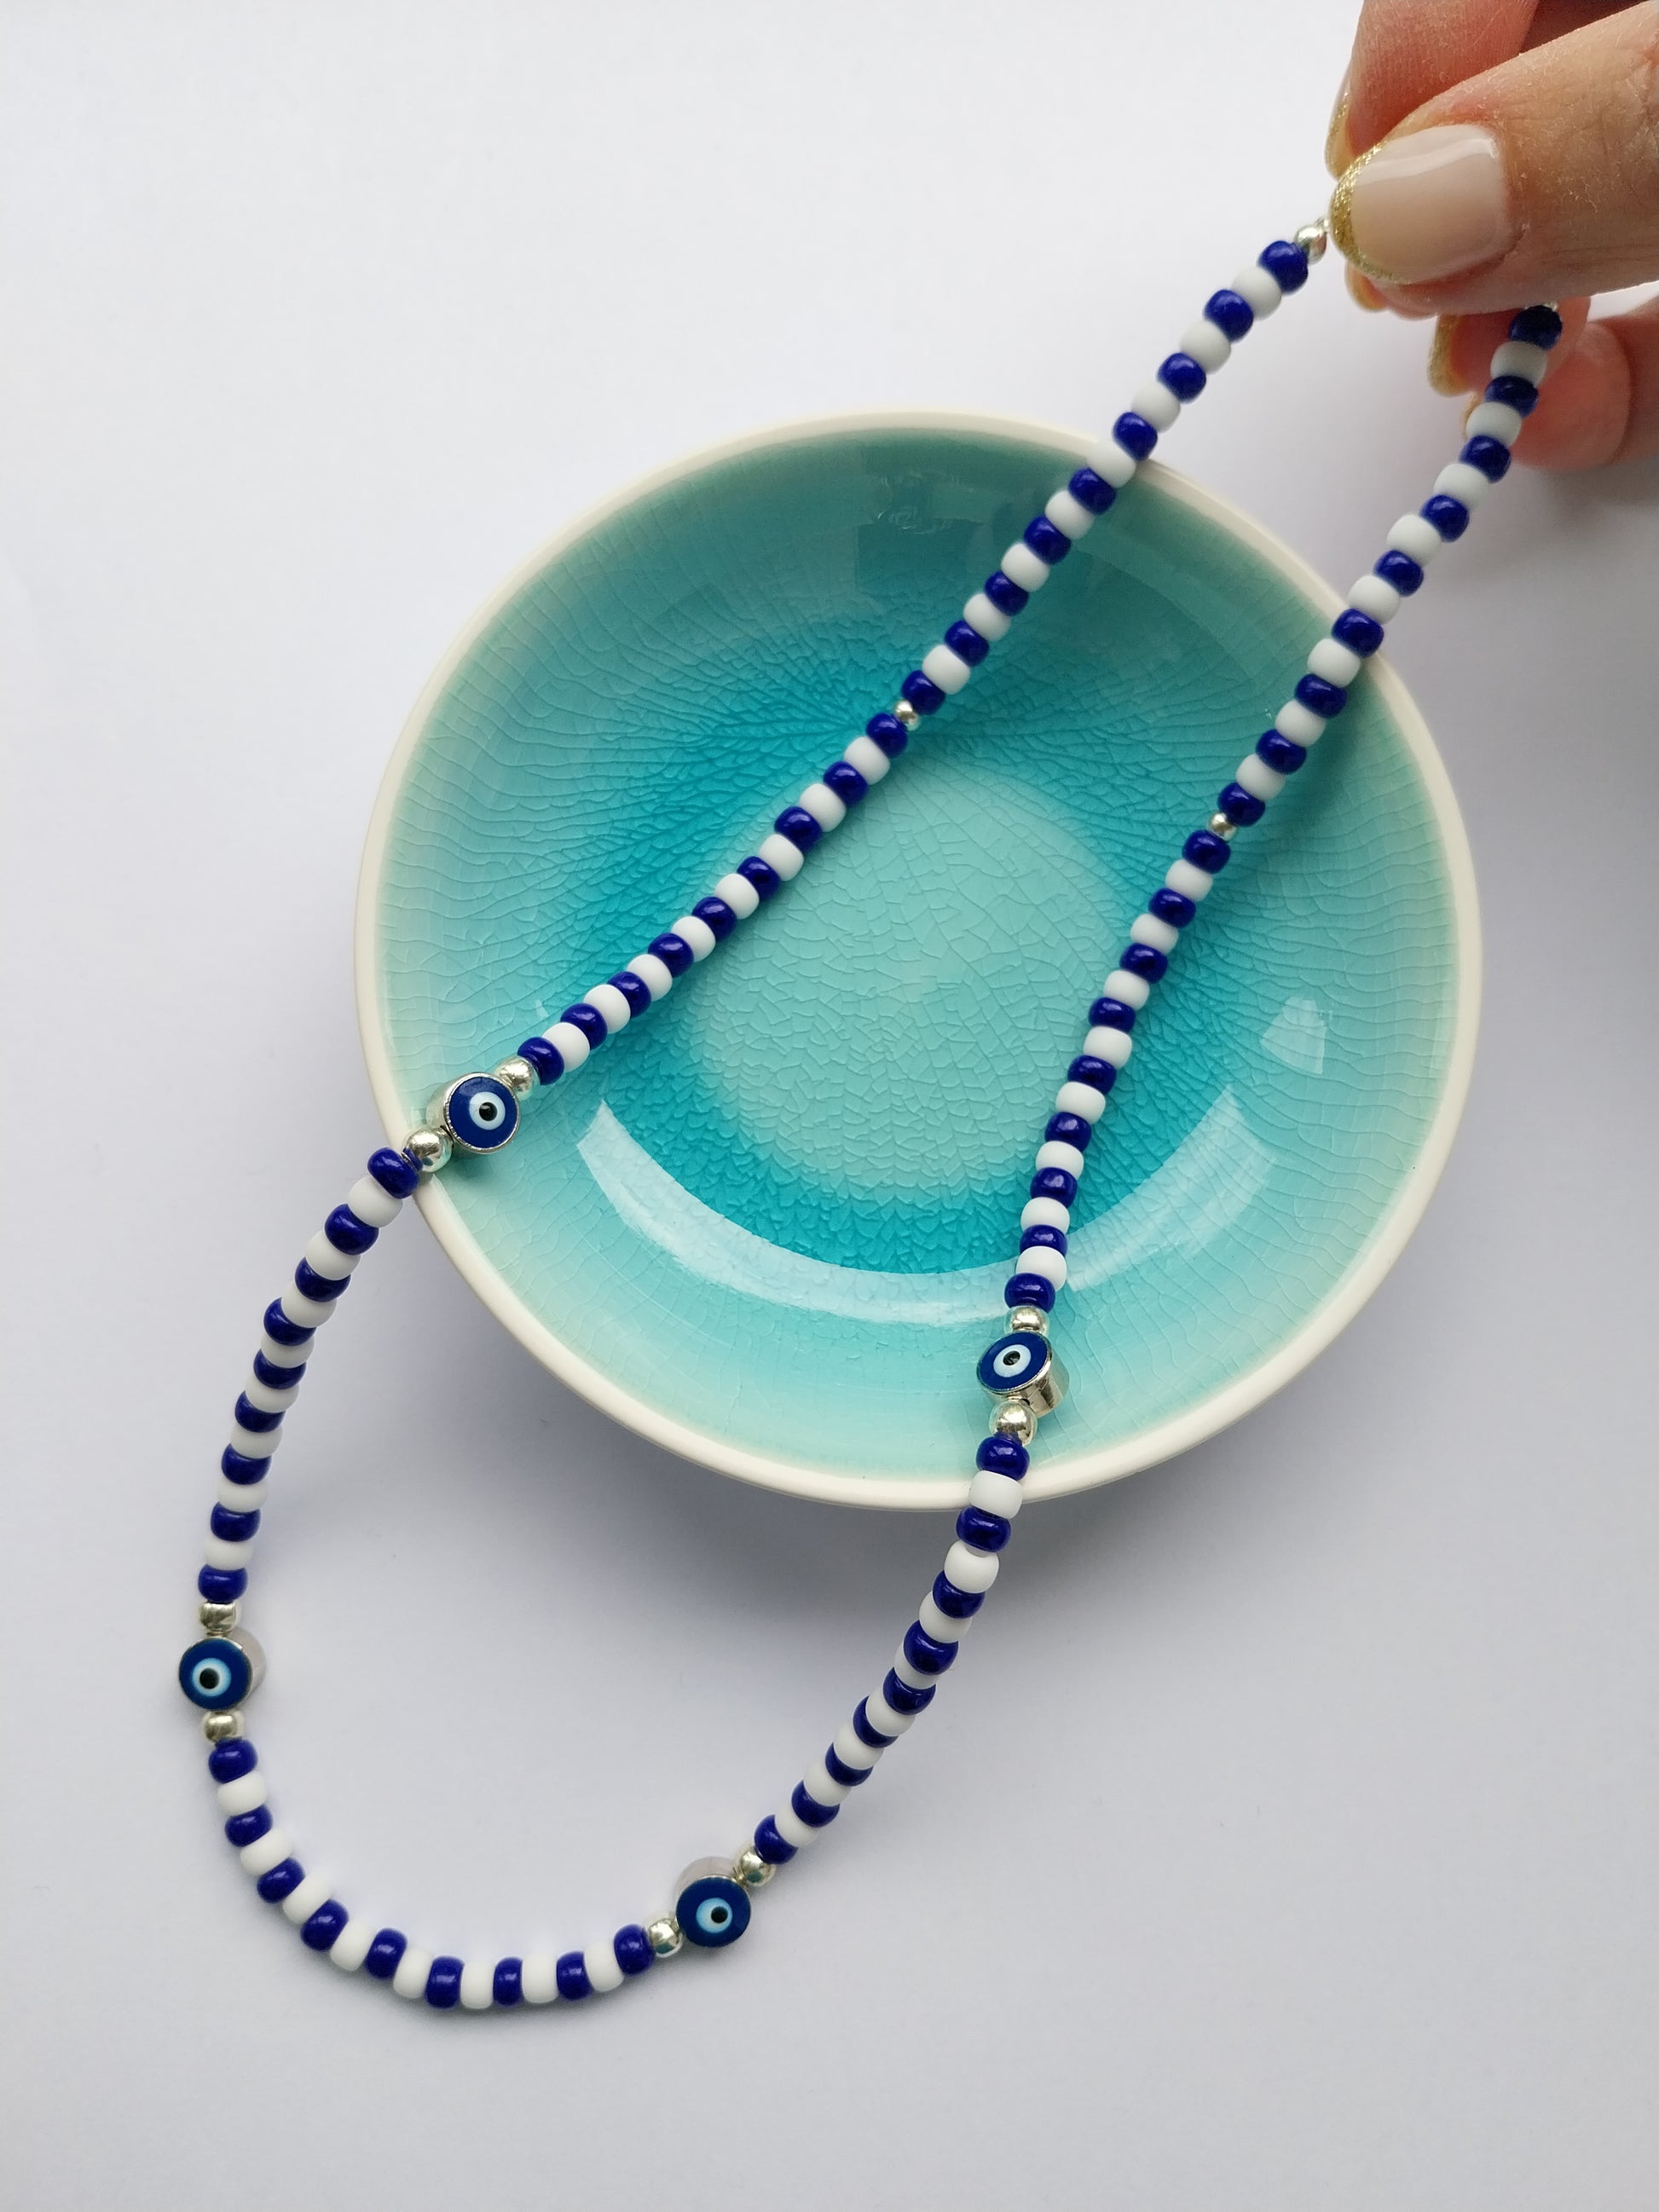 Blue and white bead necklace featuring evil eye charm beads